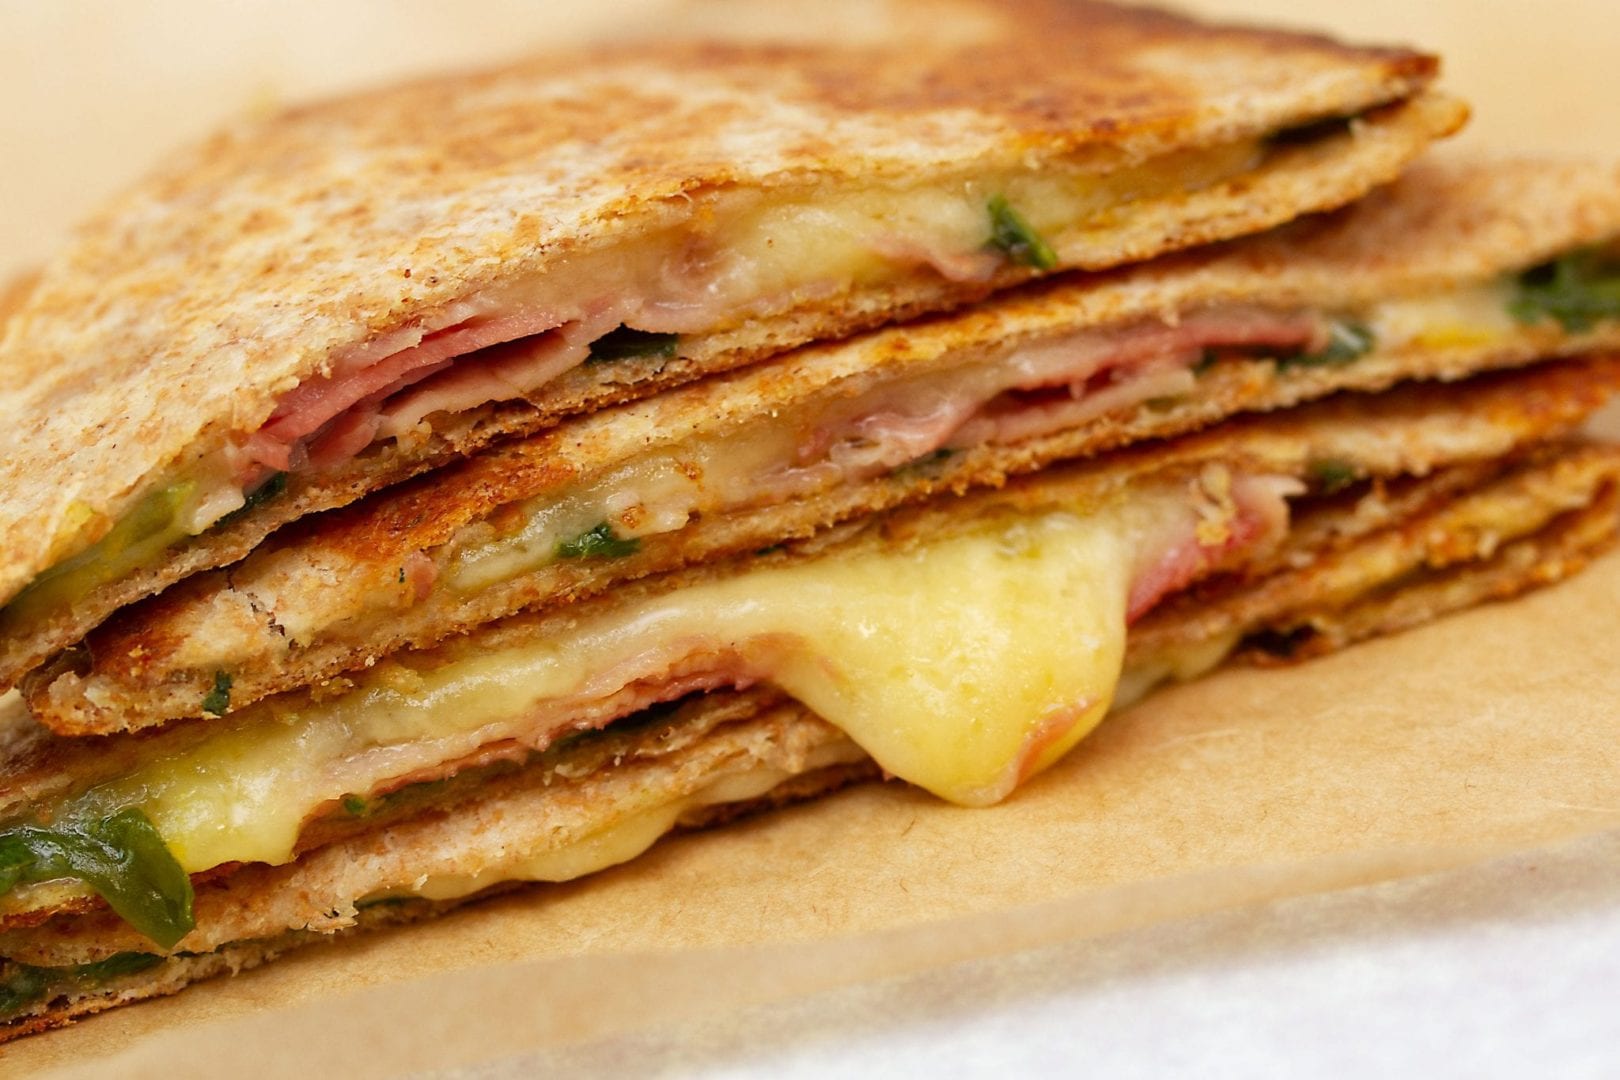 kids quesadillas - ham and cheese quesadilla - packed lunches - lunch box recipes